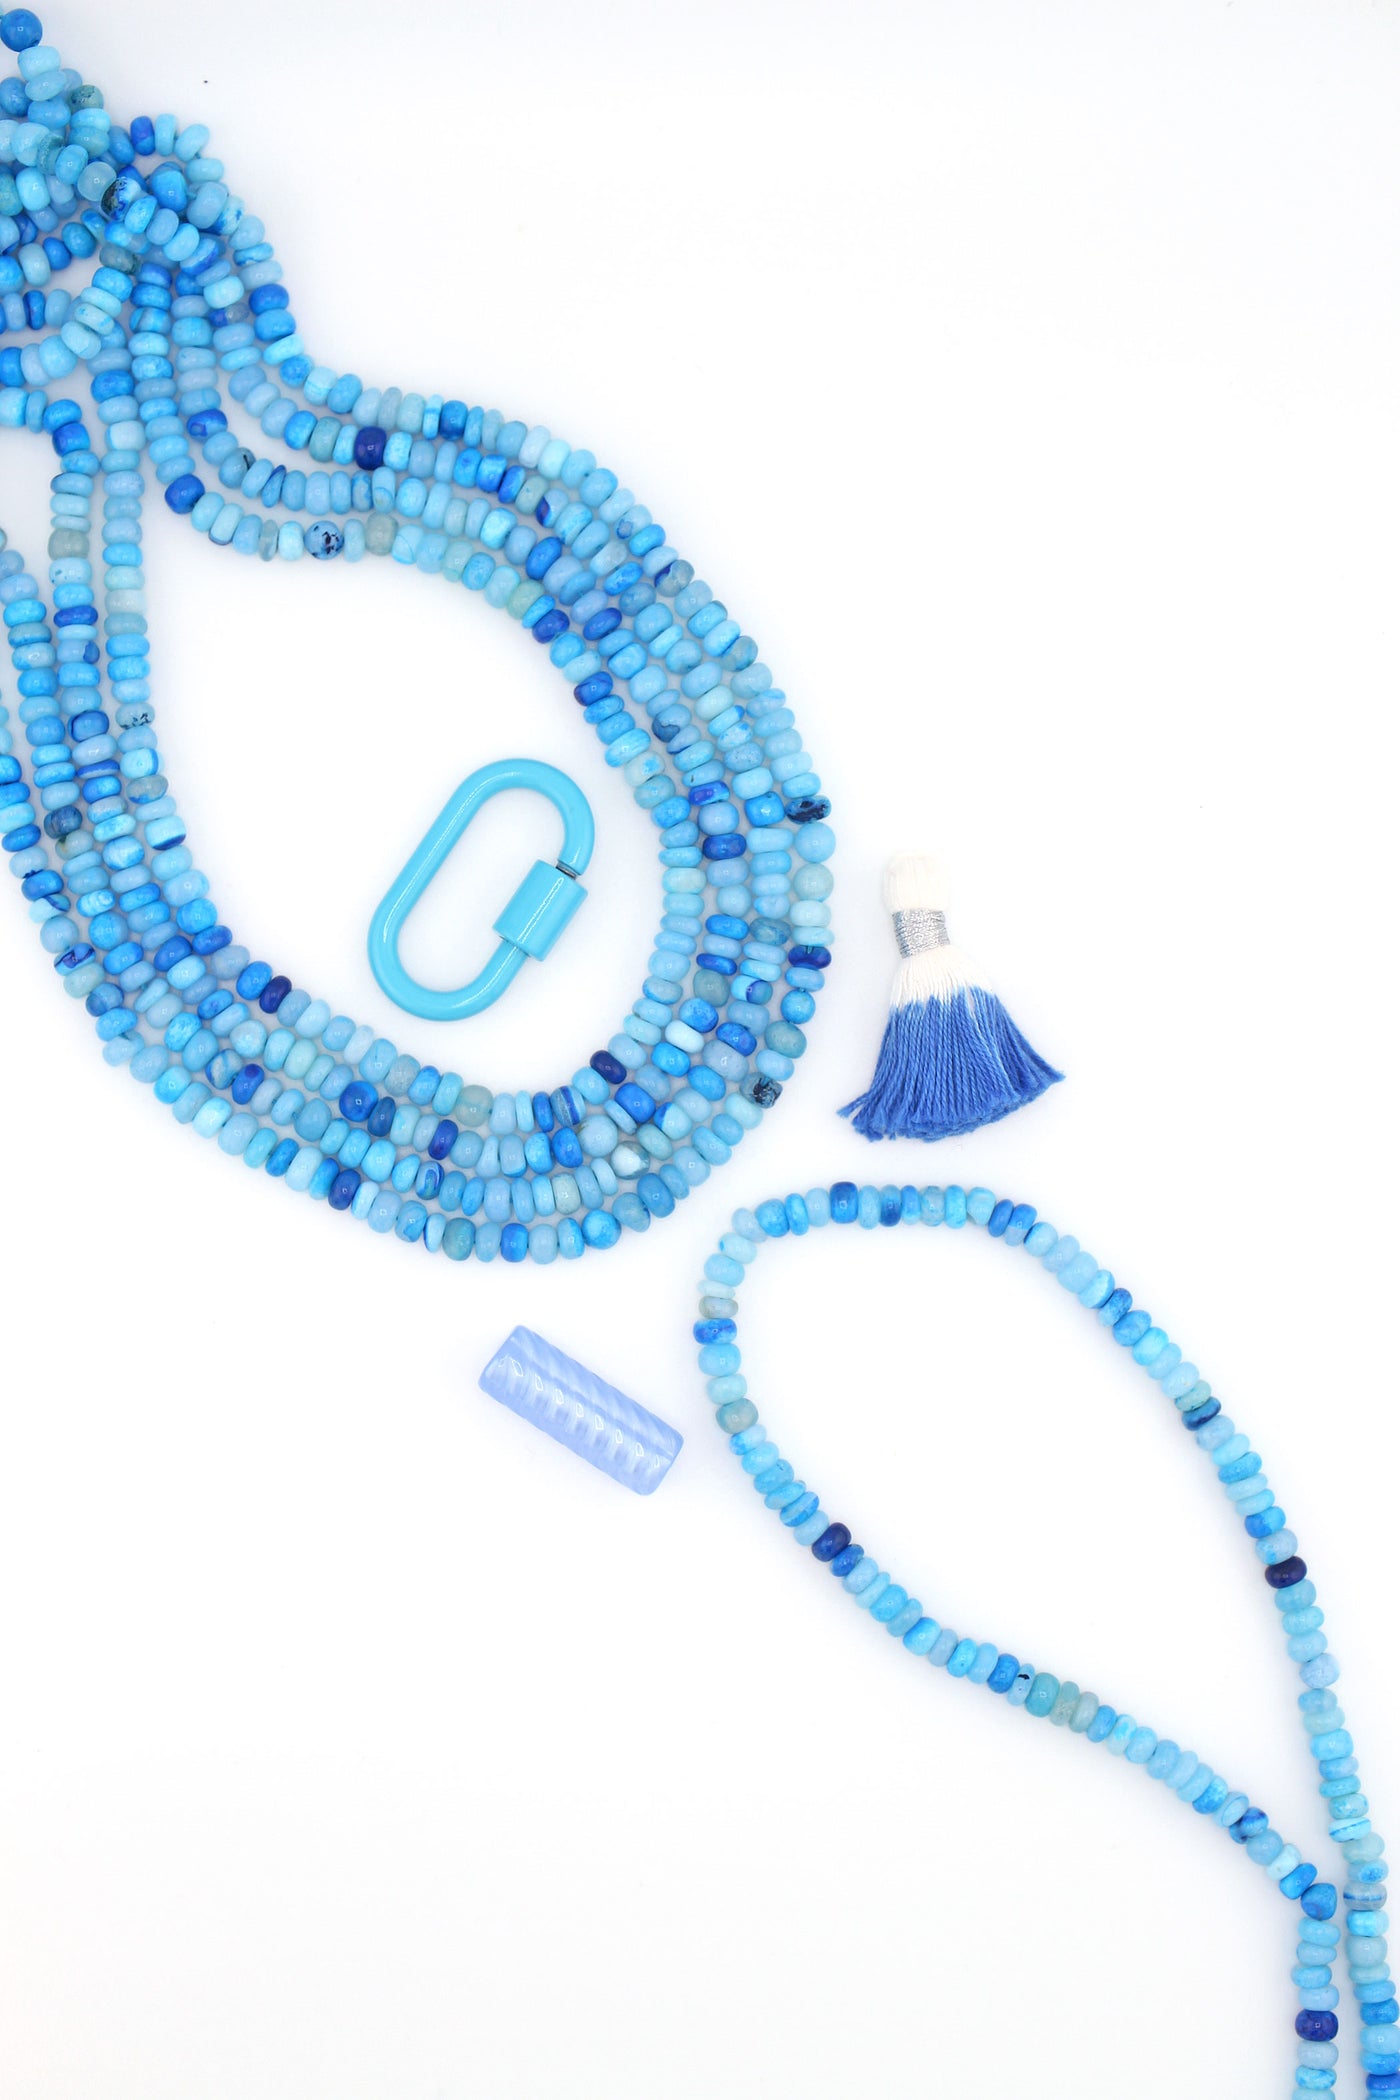 Tropical Blue Opal Smooth Rondelle Beads, 5-6mm AA Quality Beads for DIY rainbow jewelry and trendy DIY bracelets